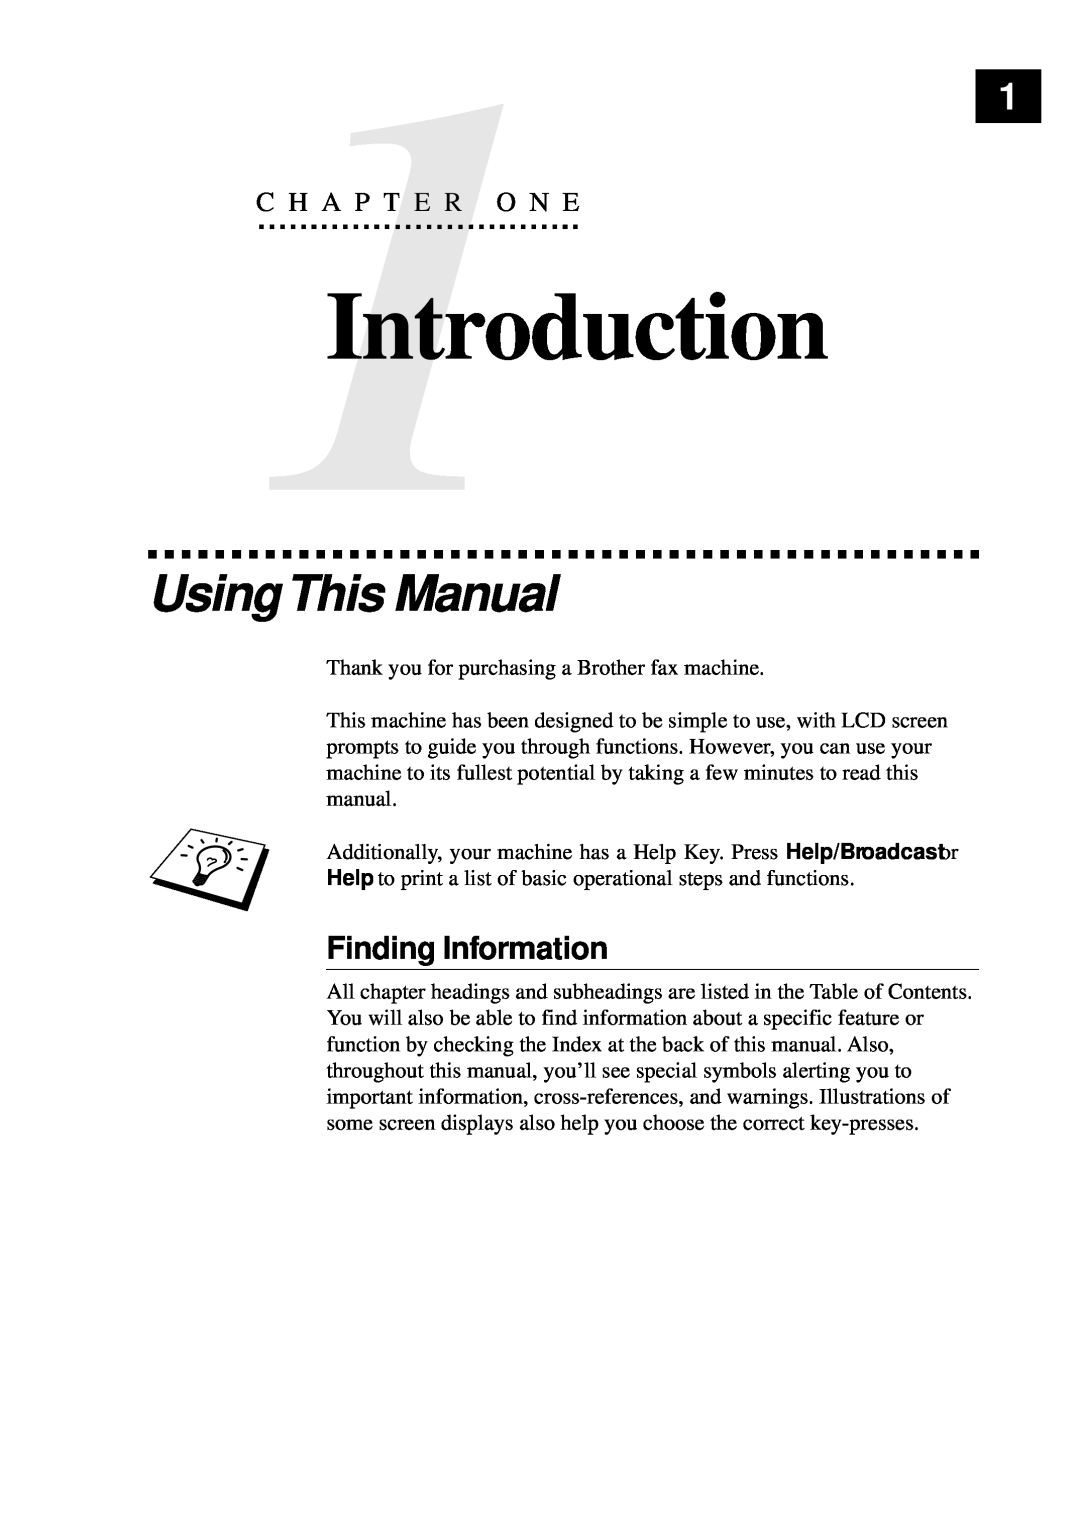 Brother MFC-9650, FAX-8350P owner manual Introduction, UsingThis Manual, Finding Information, C1H A P T E R O N E 